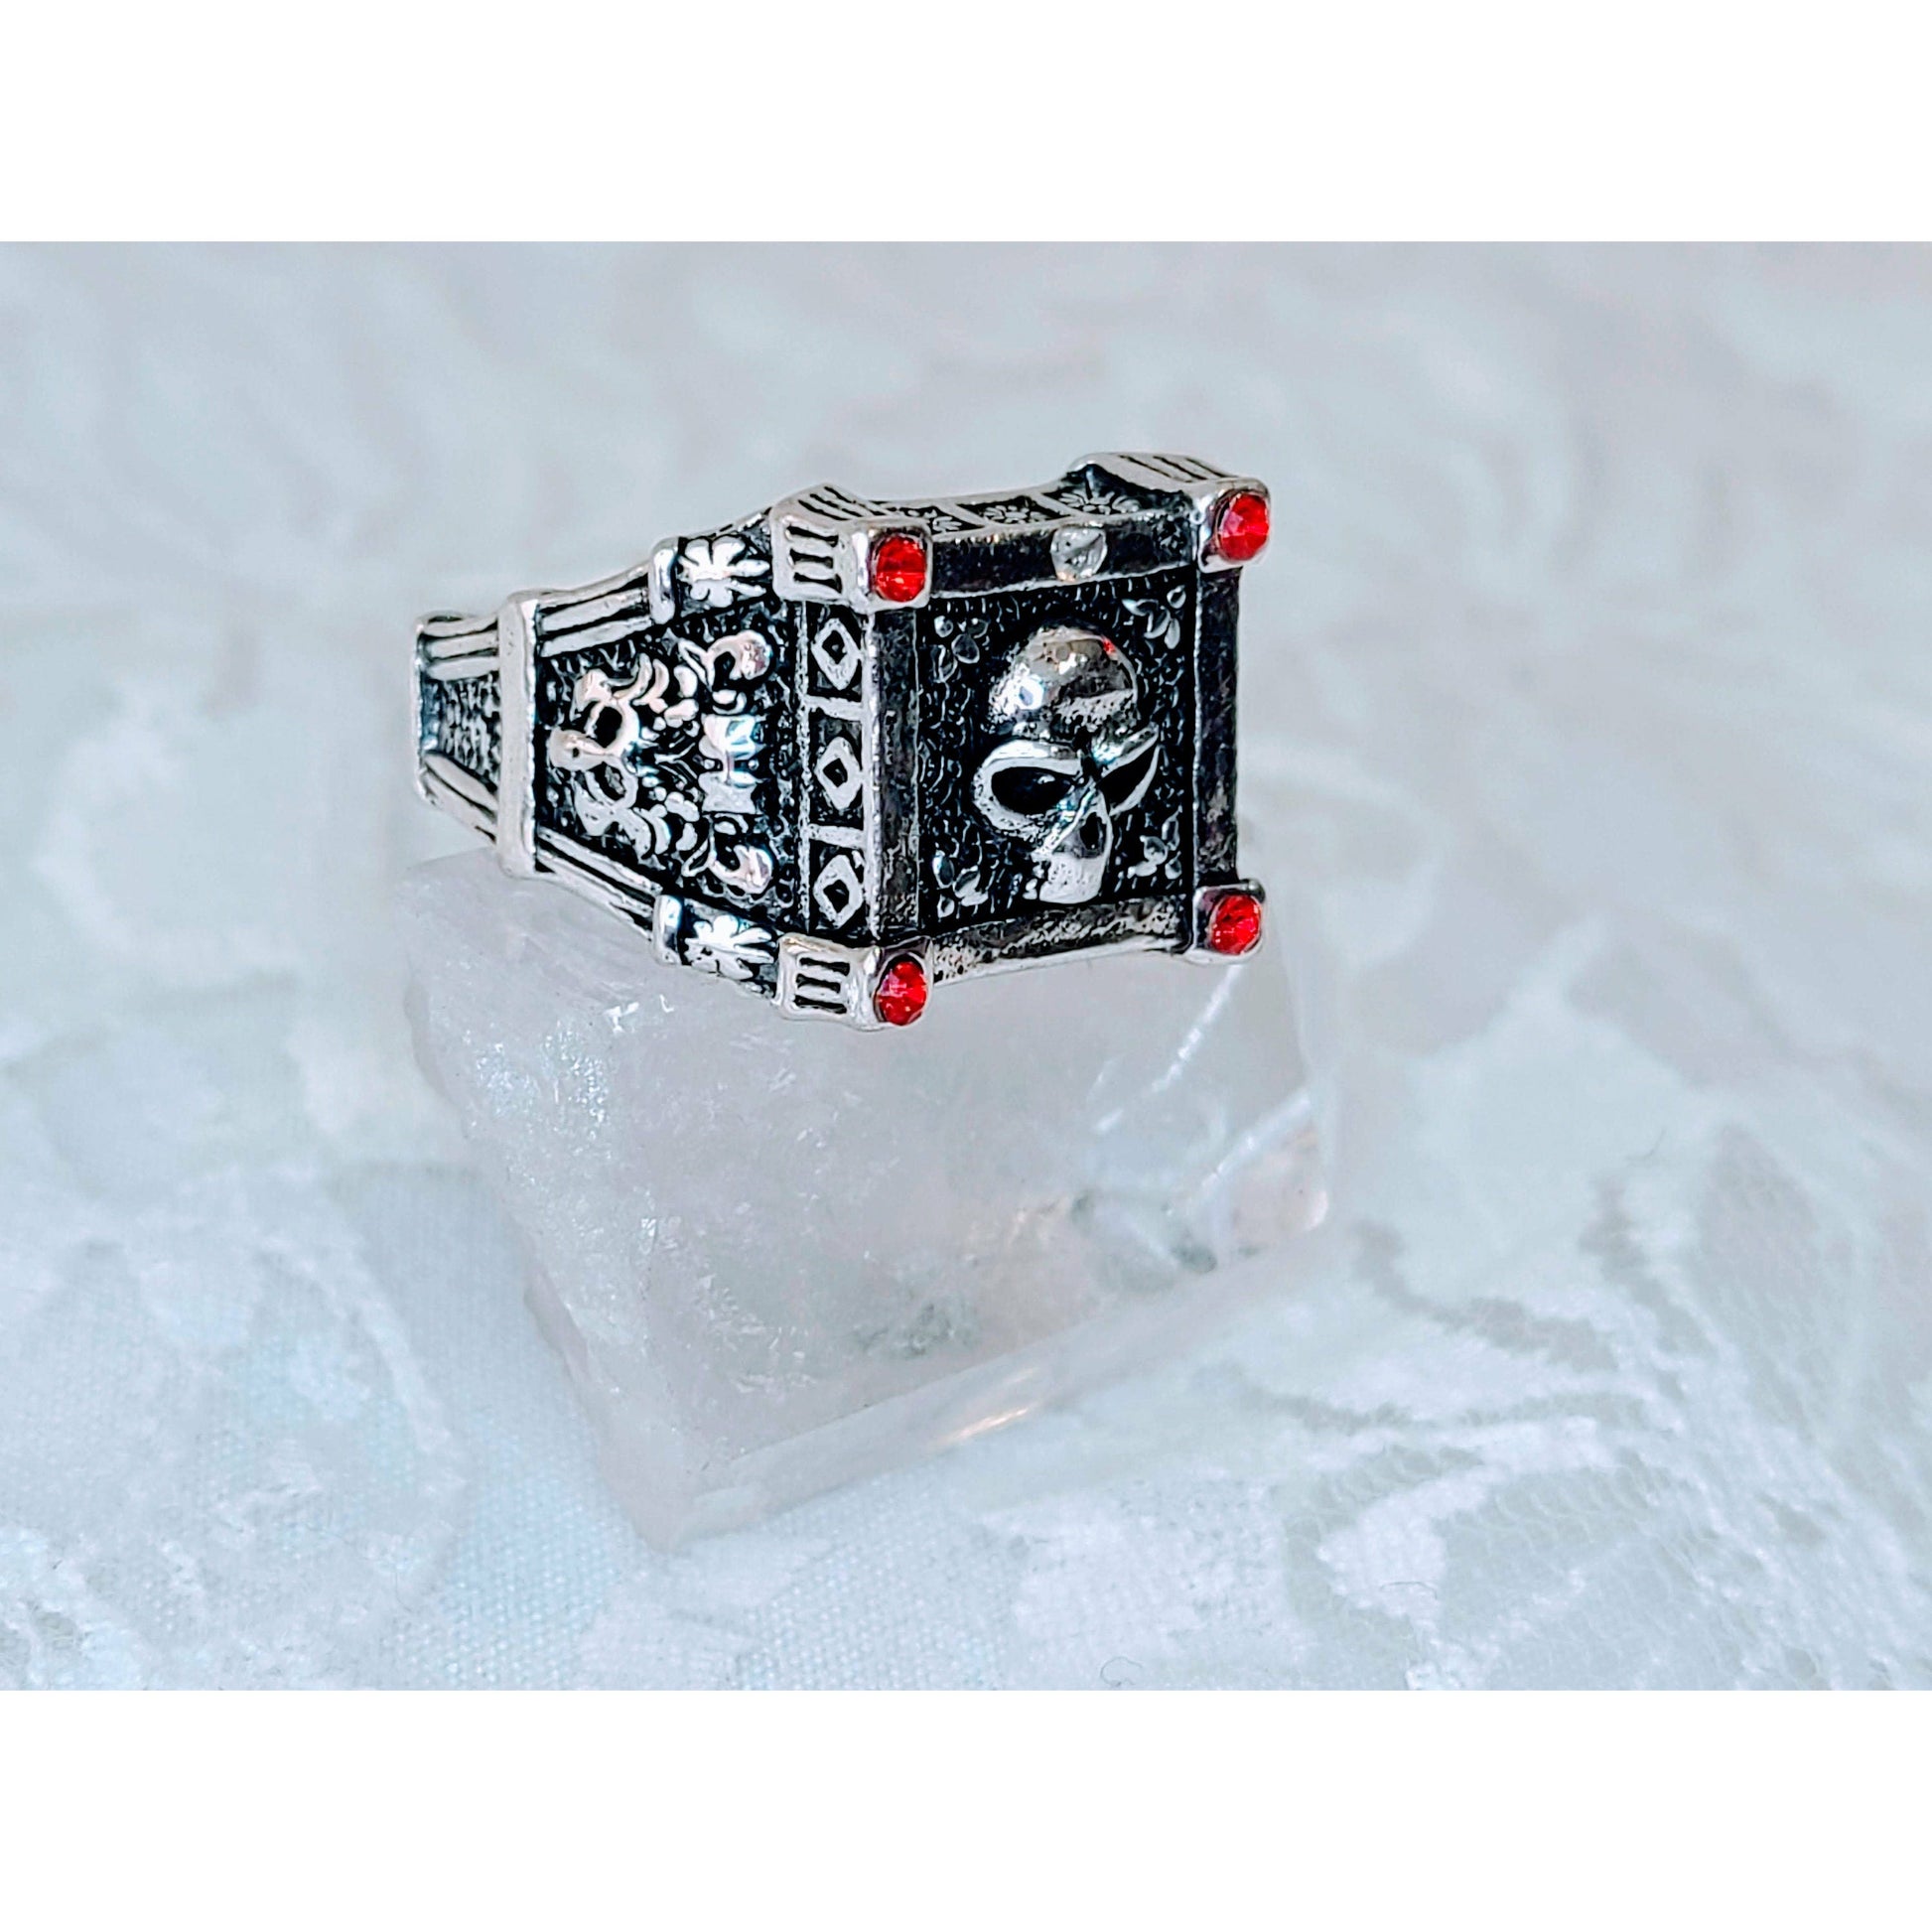 Silver Skull Ring w/ Red Rhinestones Square Stainless Steel ~ Boyfriend Gift ~ Gift for Best Friends ~ Comes in Gift Box ALMOST GONE!